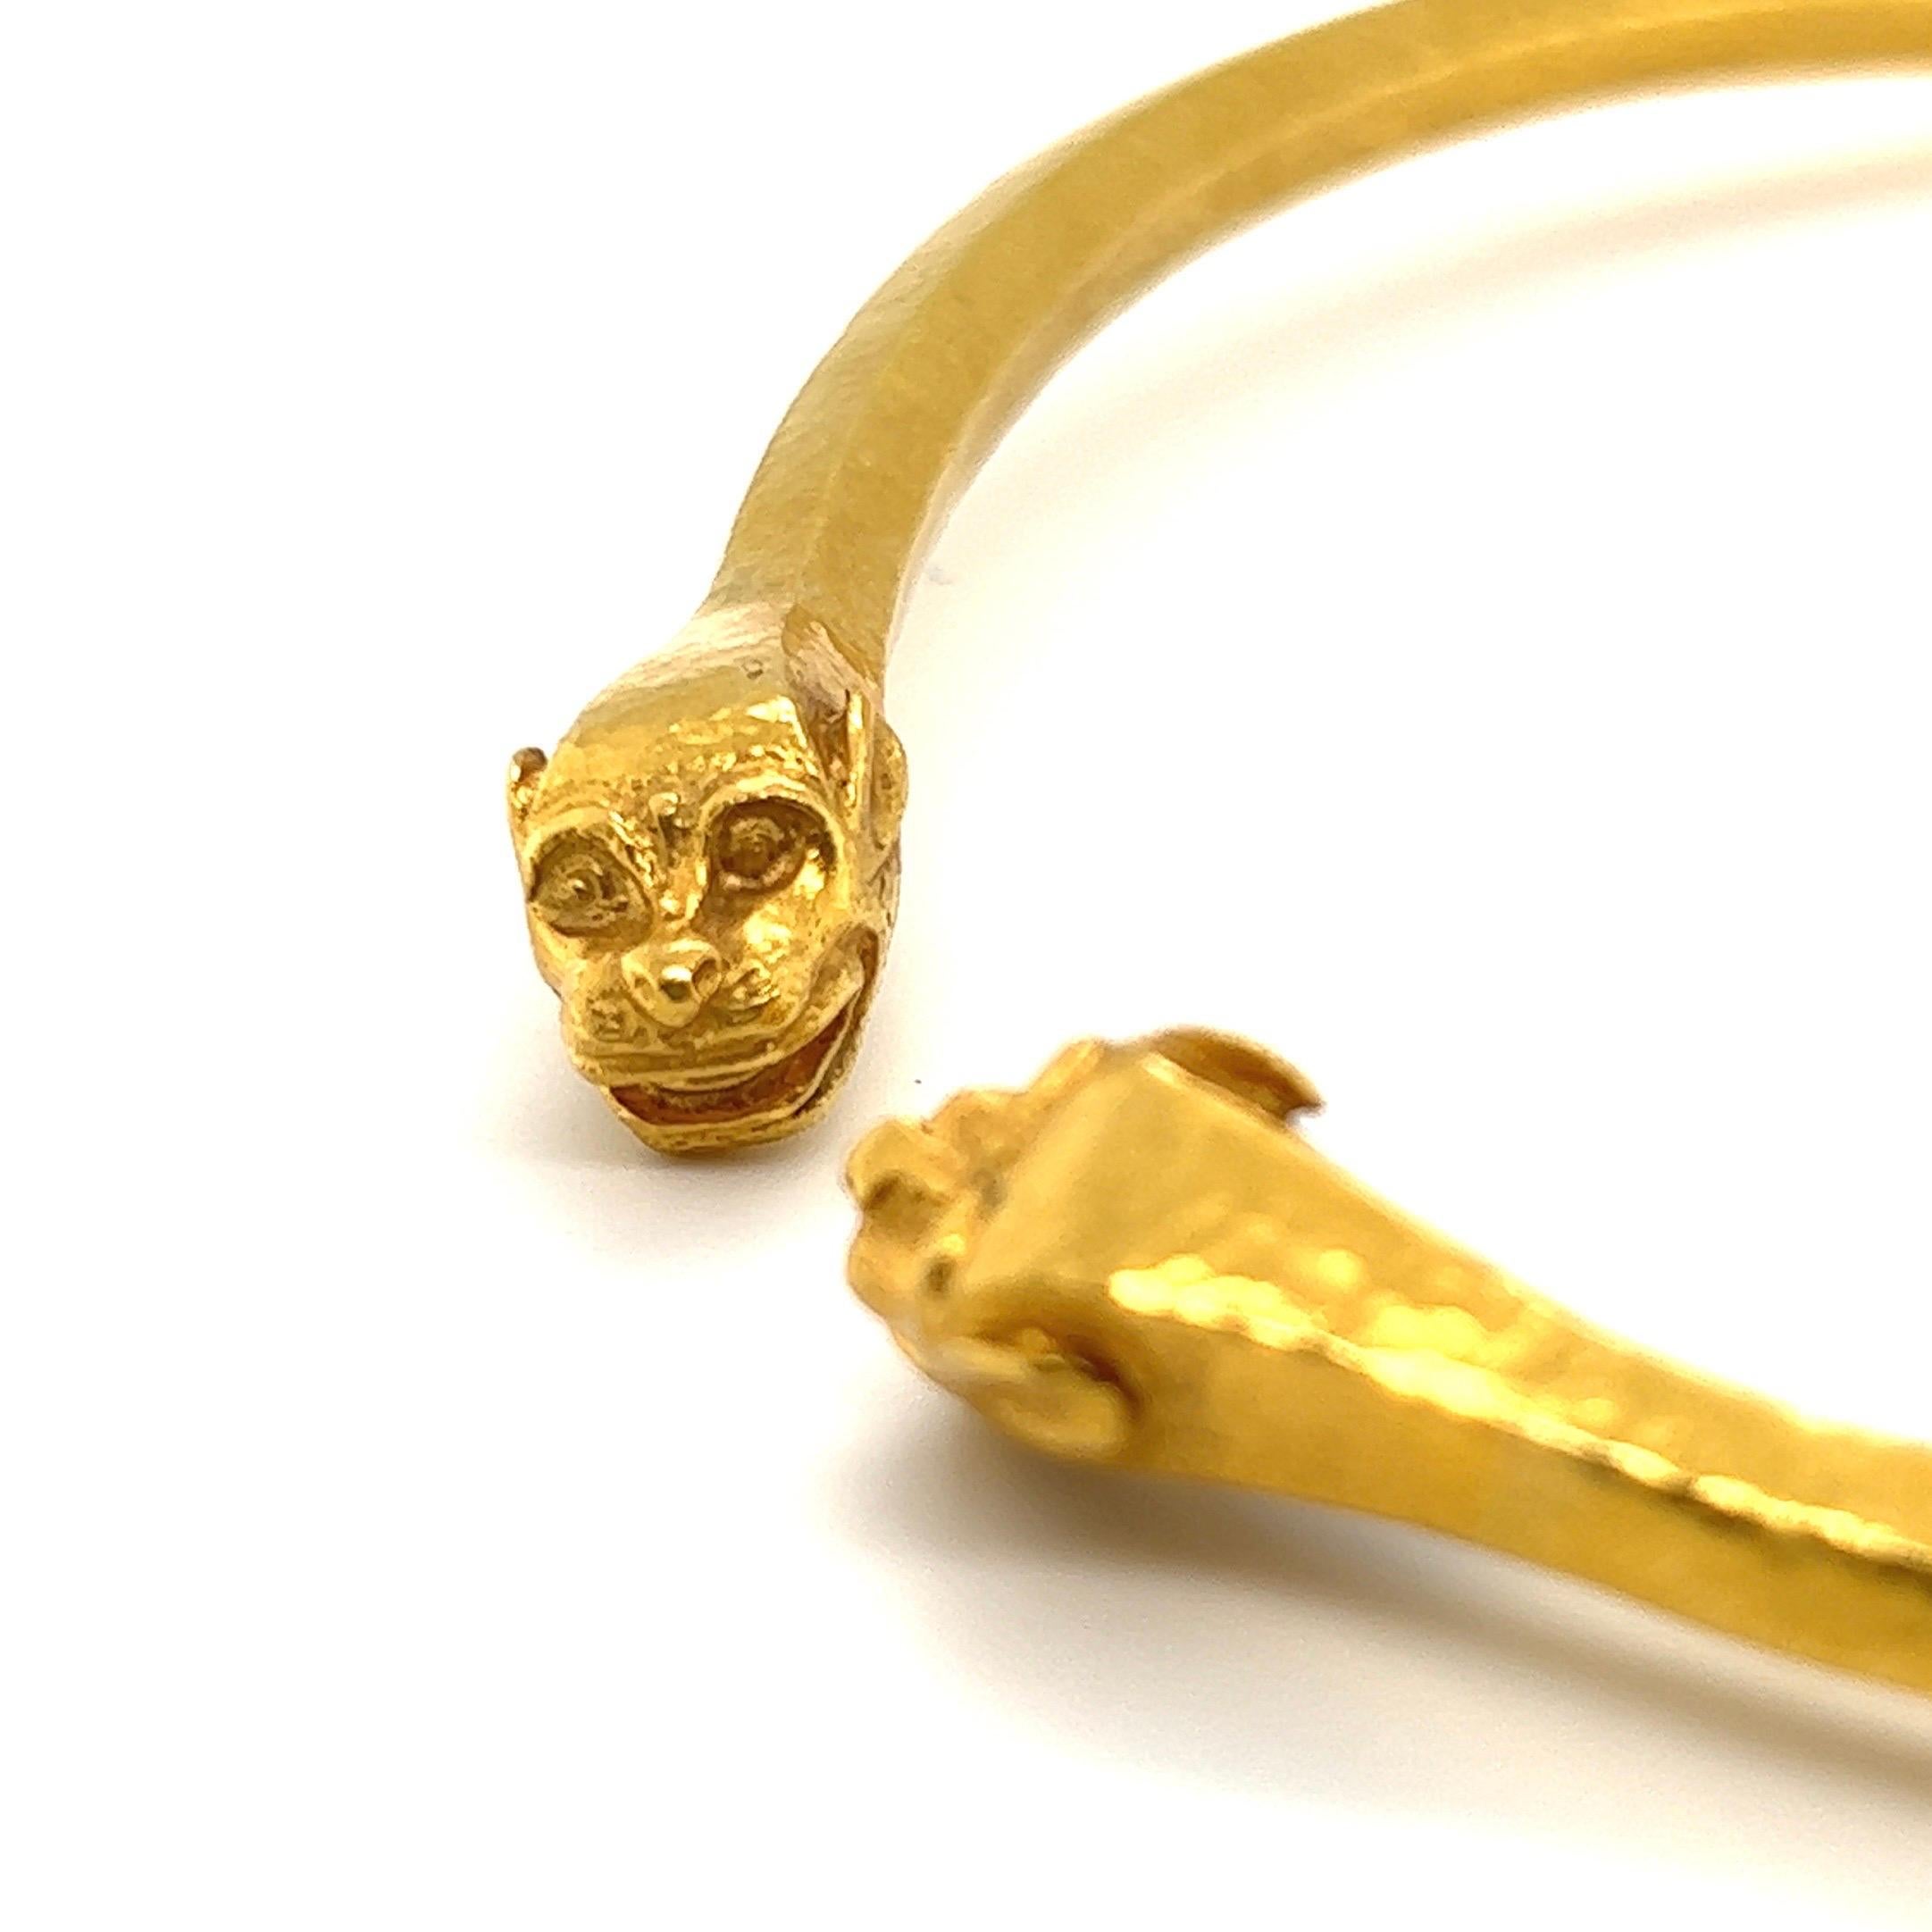 Fabulous 18 karat yellow gold torque/choker necklace by Ilias Lalaounis.
Hellenistic style rigid necklace handcrafted in 18 karat hammered gold ending by two feline's heads in the front. The necklace opens by a hinge in the back. It is light,